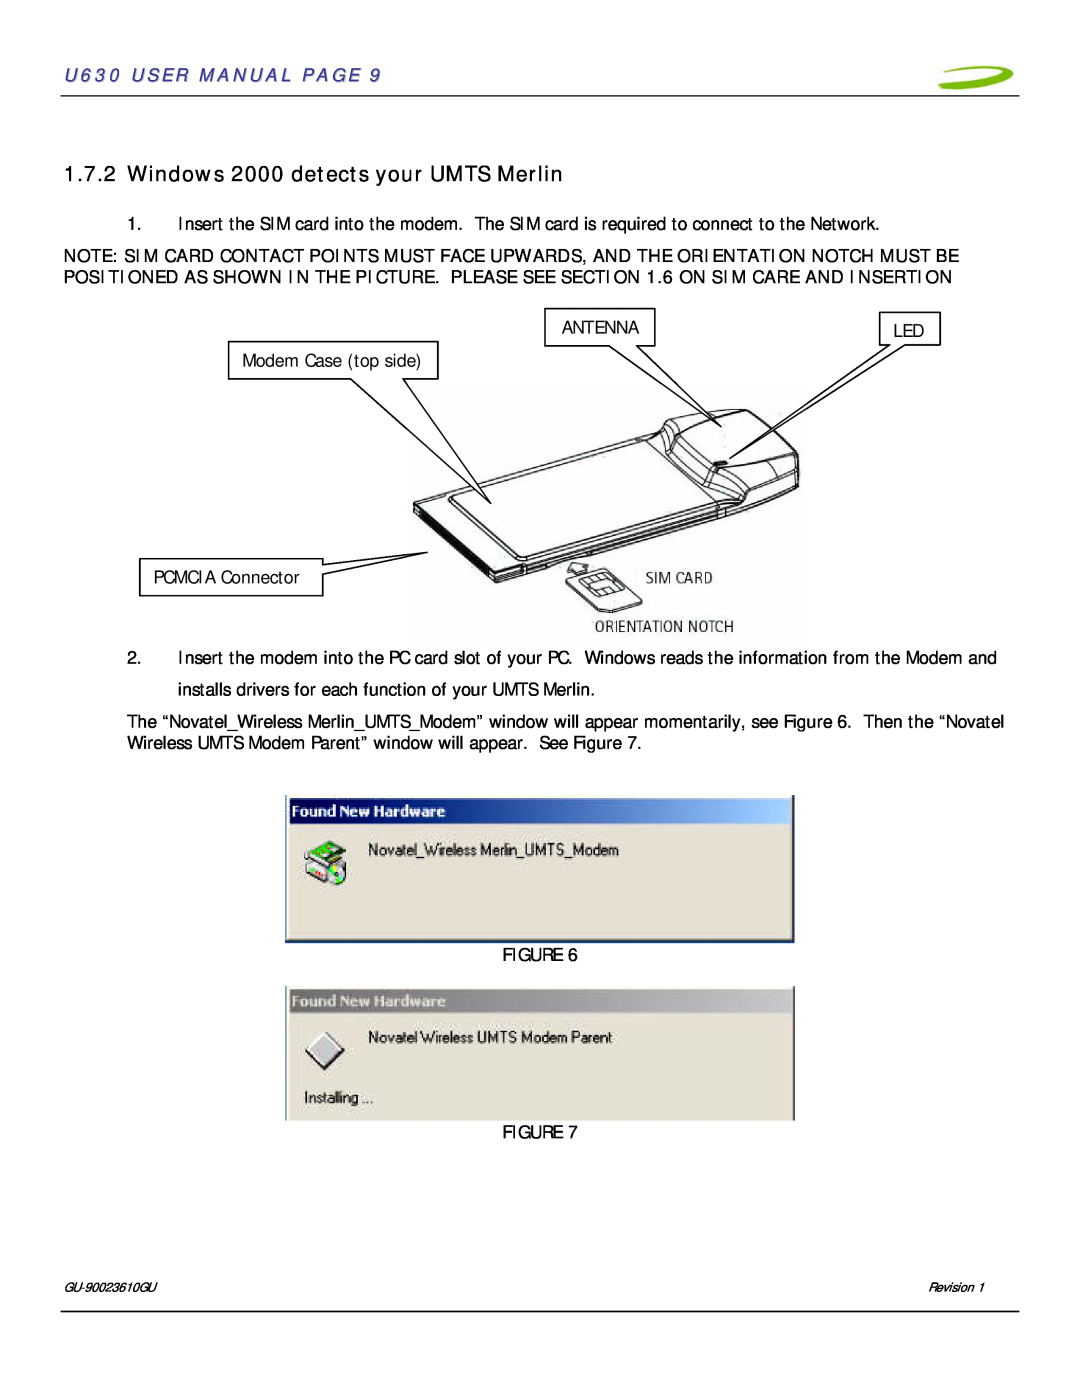 InFocus user manual Windows 2000 detects your UMTS Merlin, U630 USER MANUAL PAGE 